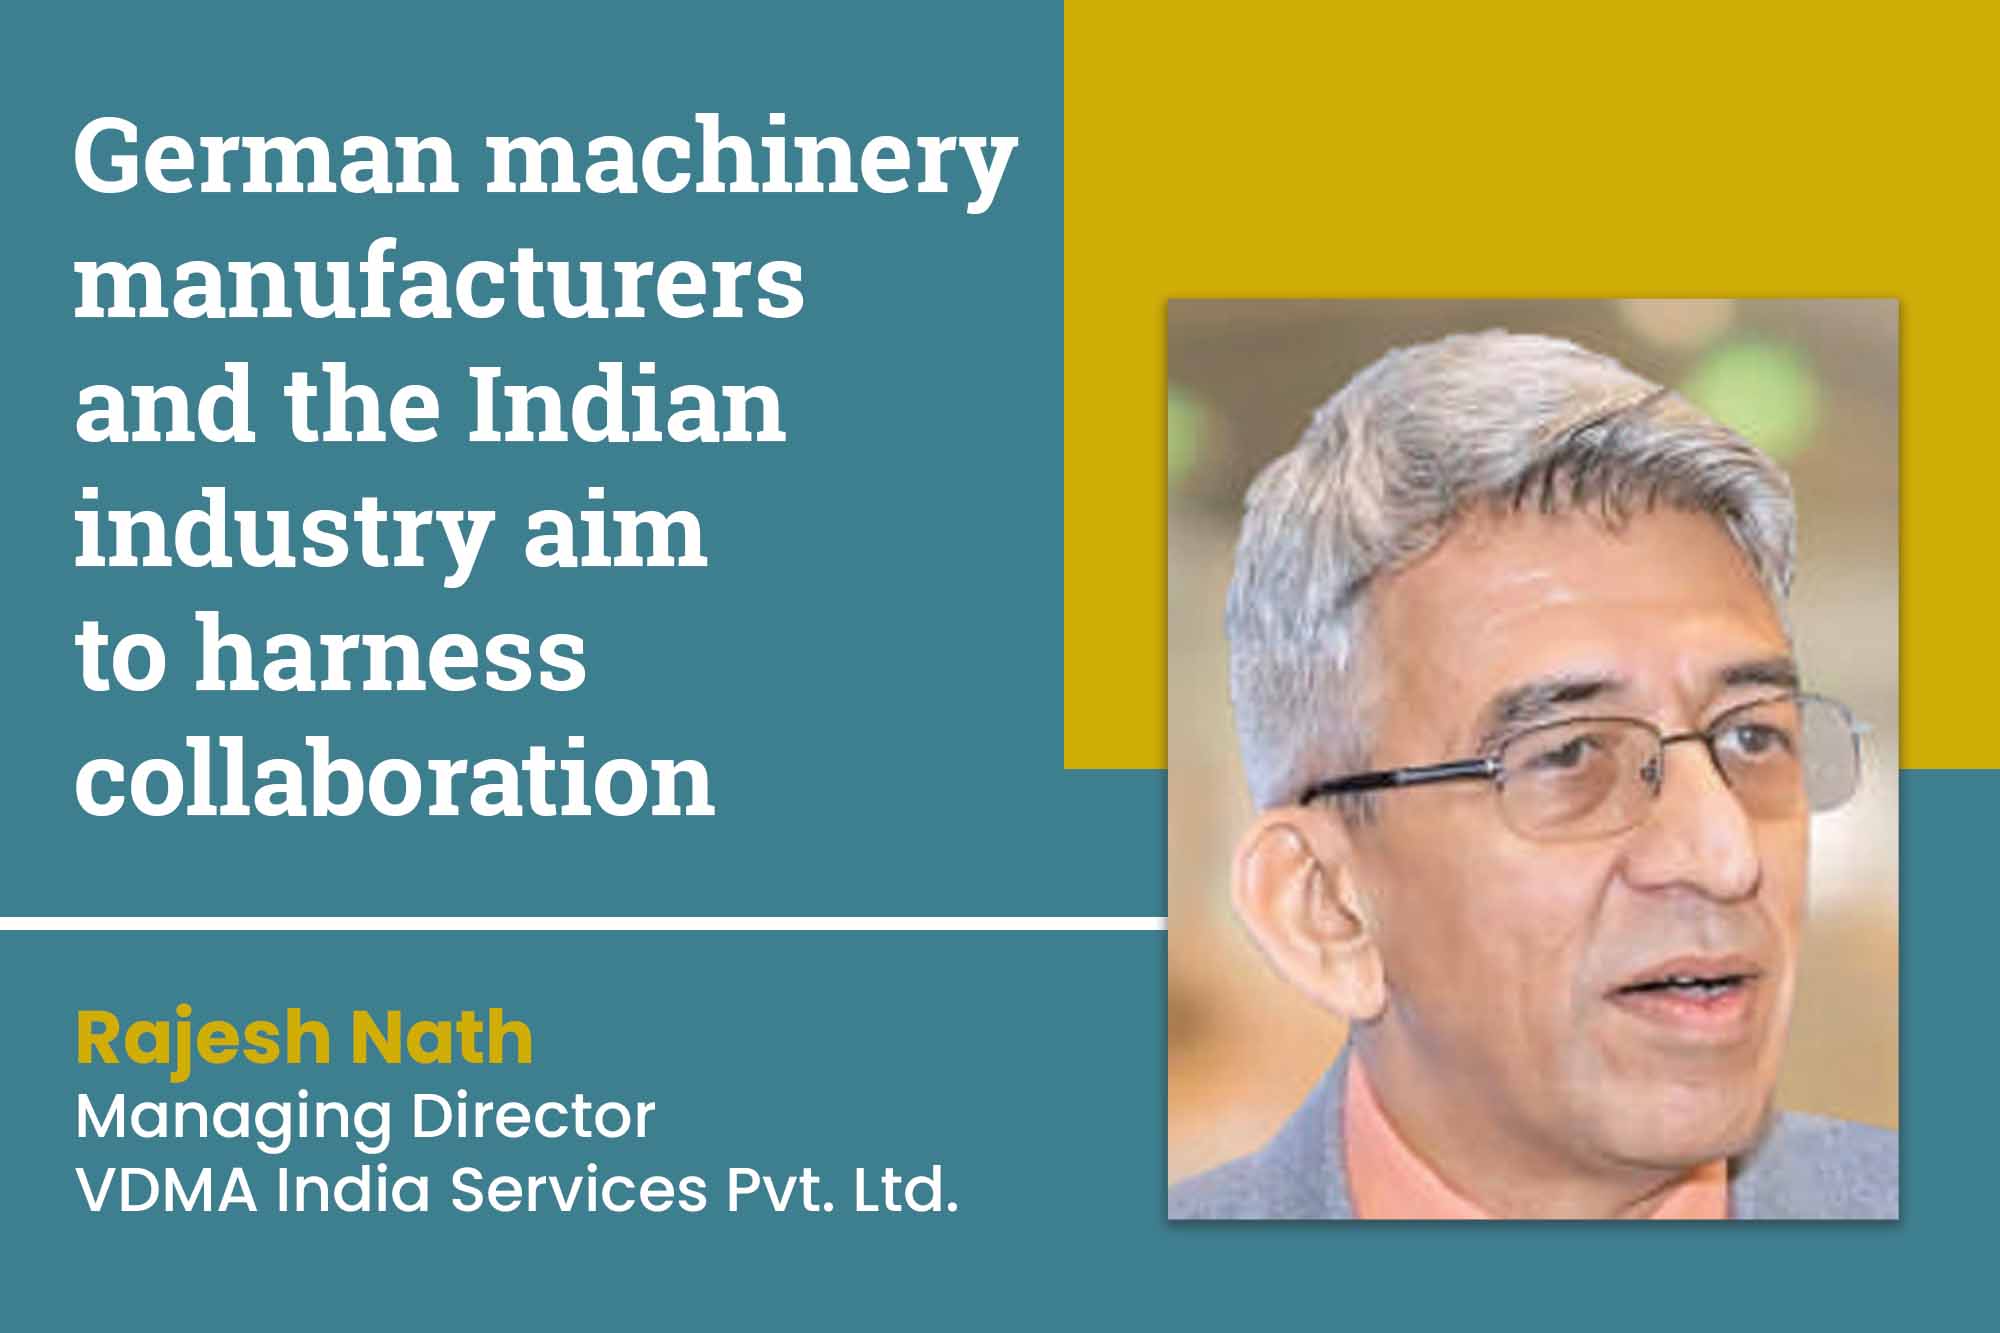 German machinery manufacturers and the Indian industry aim to harness collaboration